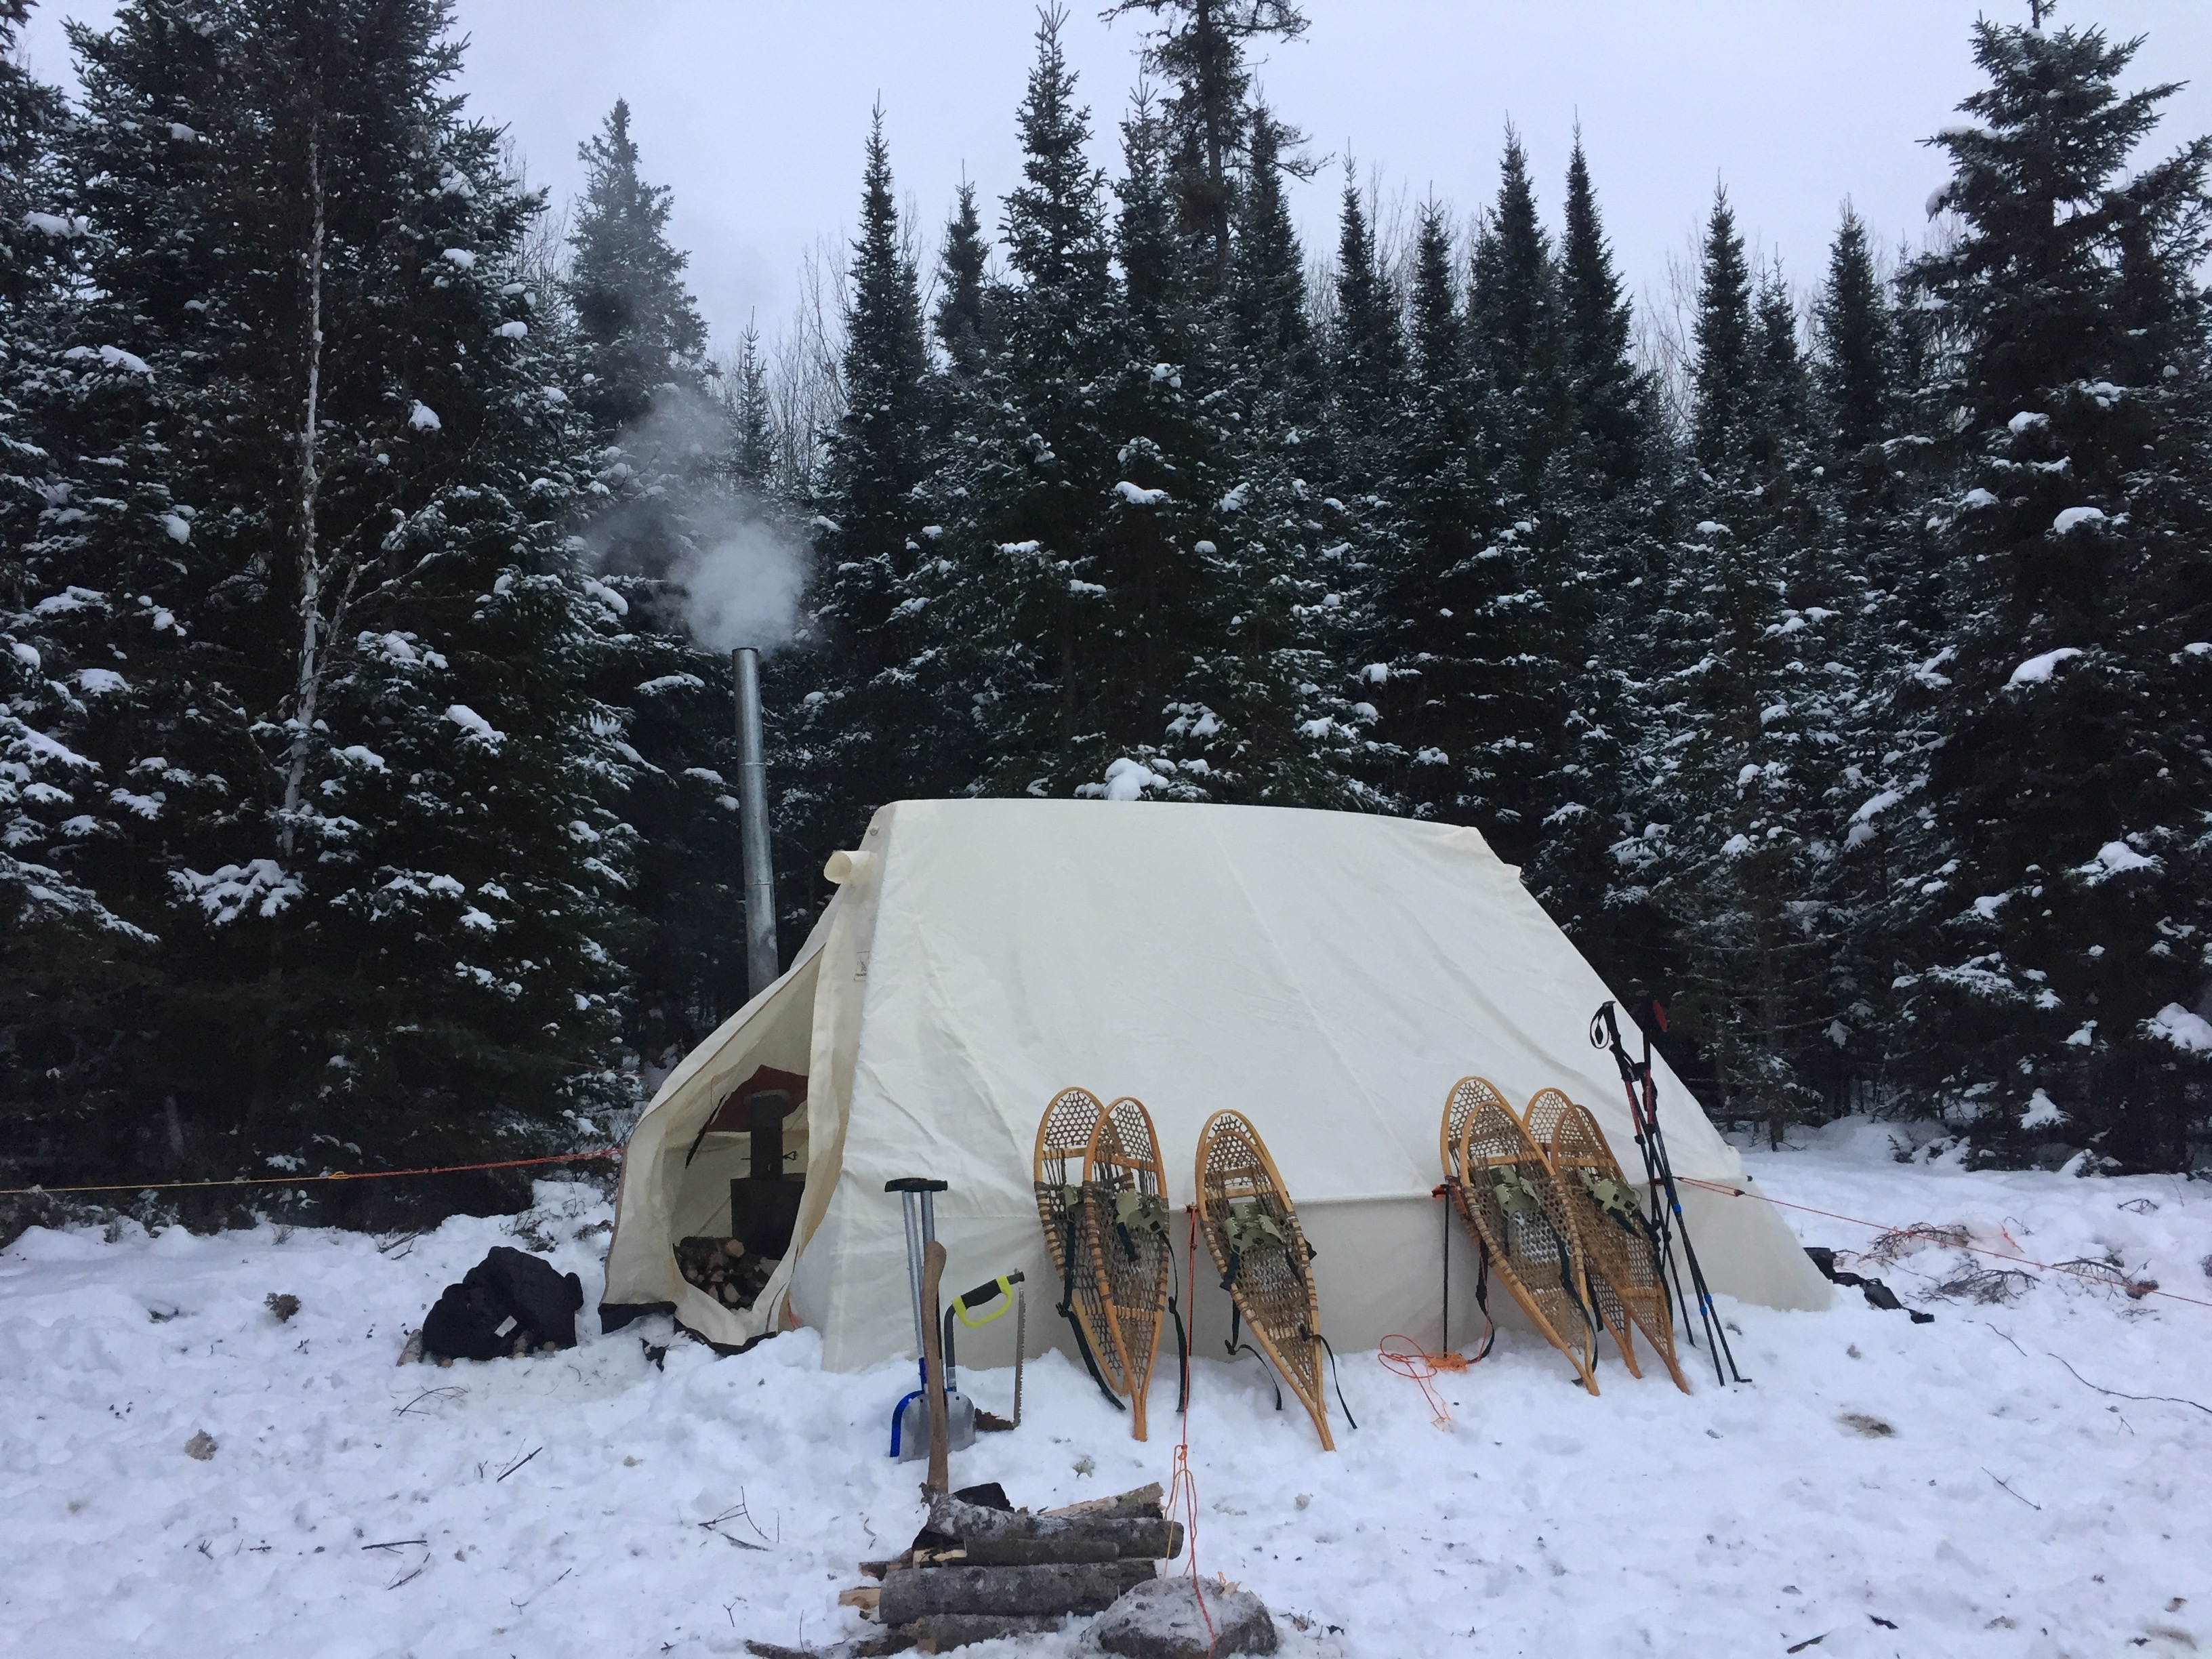 Try this: winter camping - The Globe and Mail